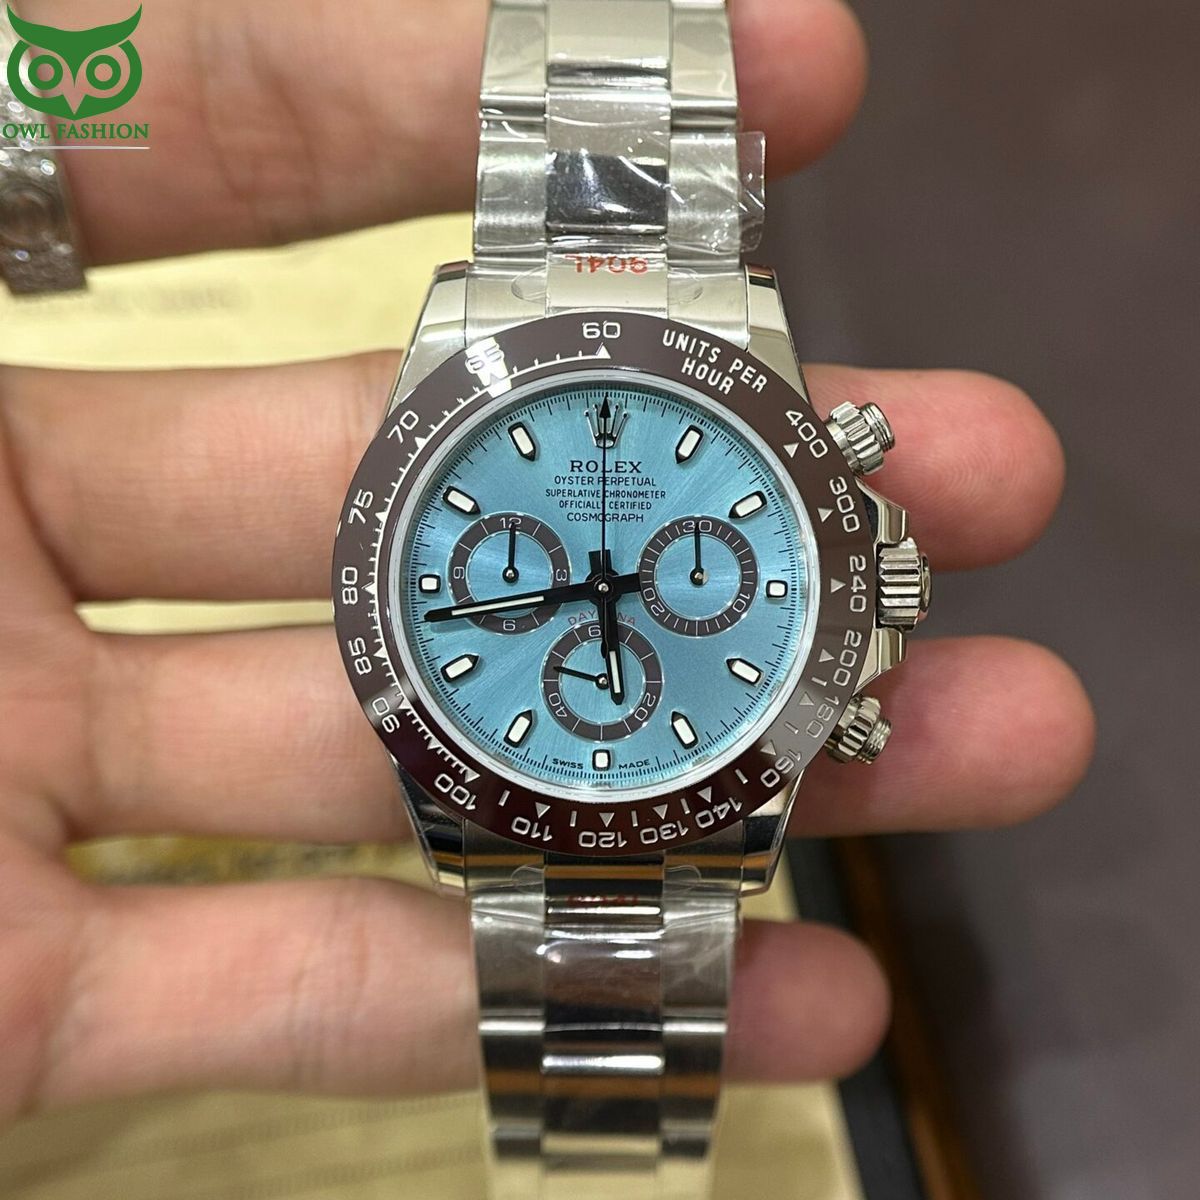 Cosmograph Daytona Platinum Ice Blue Dial Watch My friend and partner